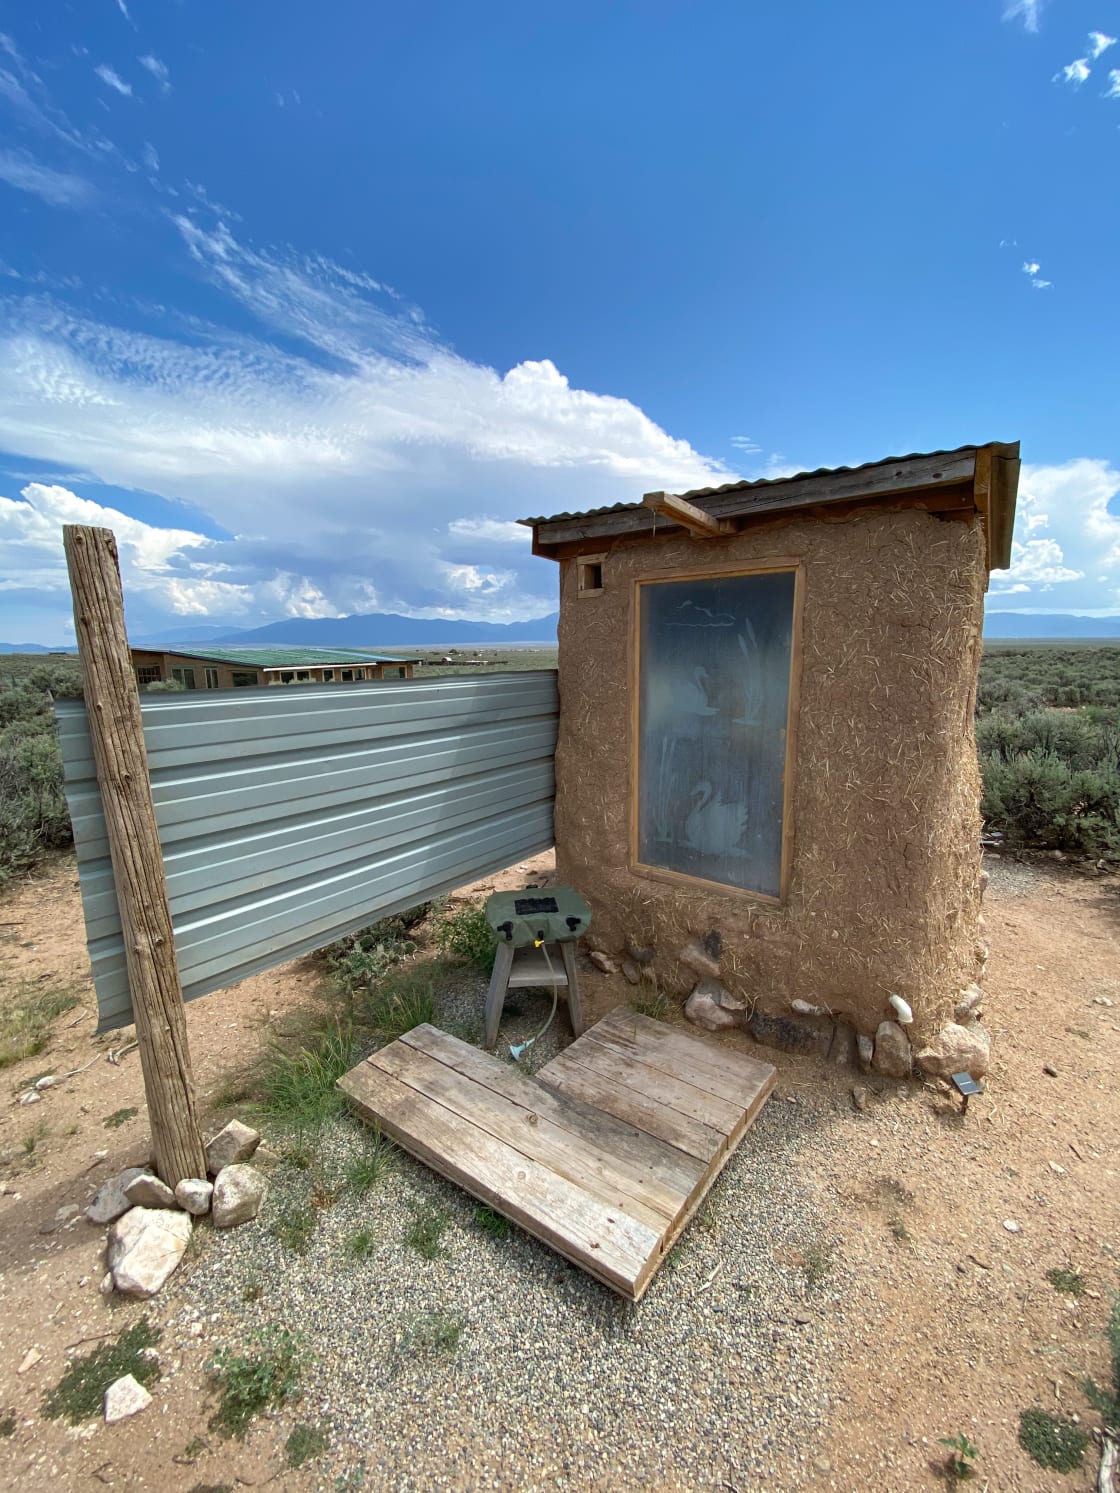 Outhouse and solar showering area